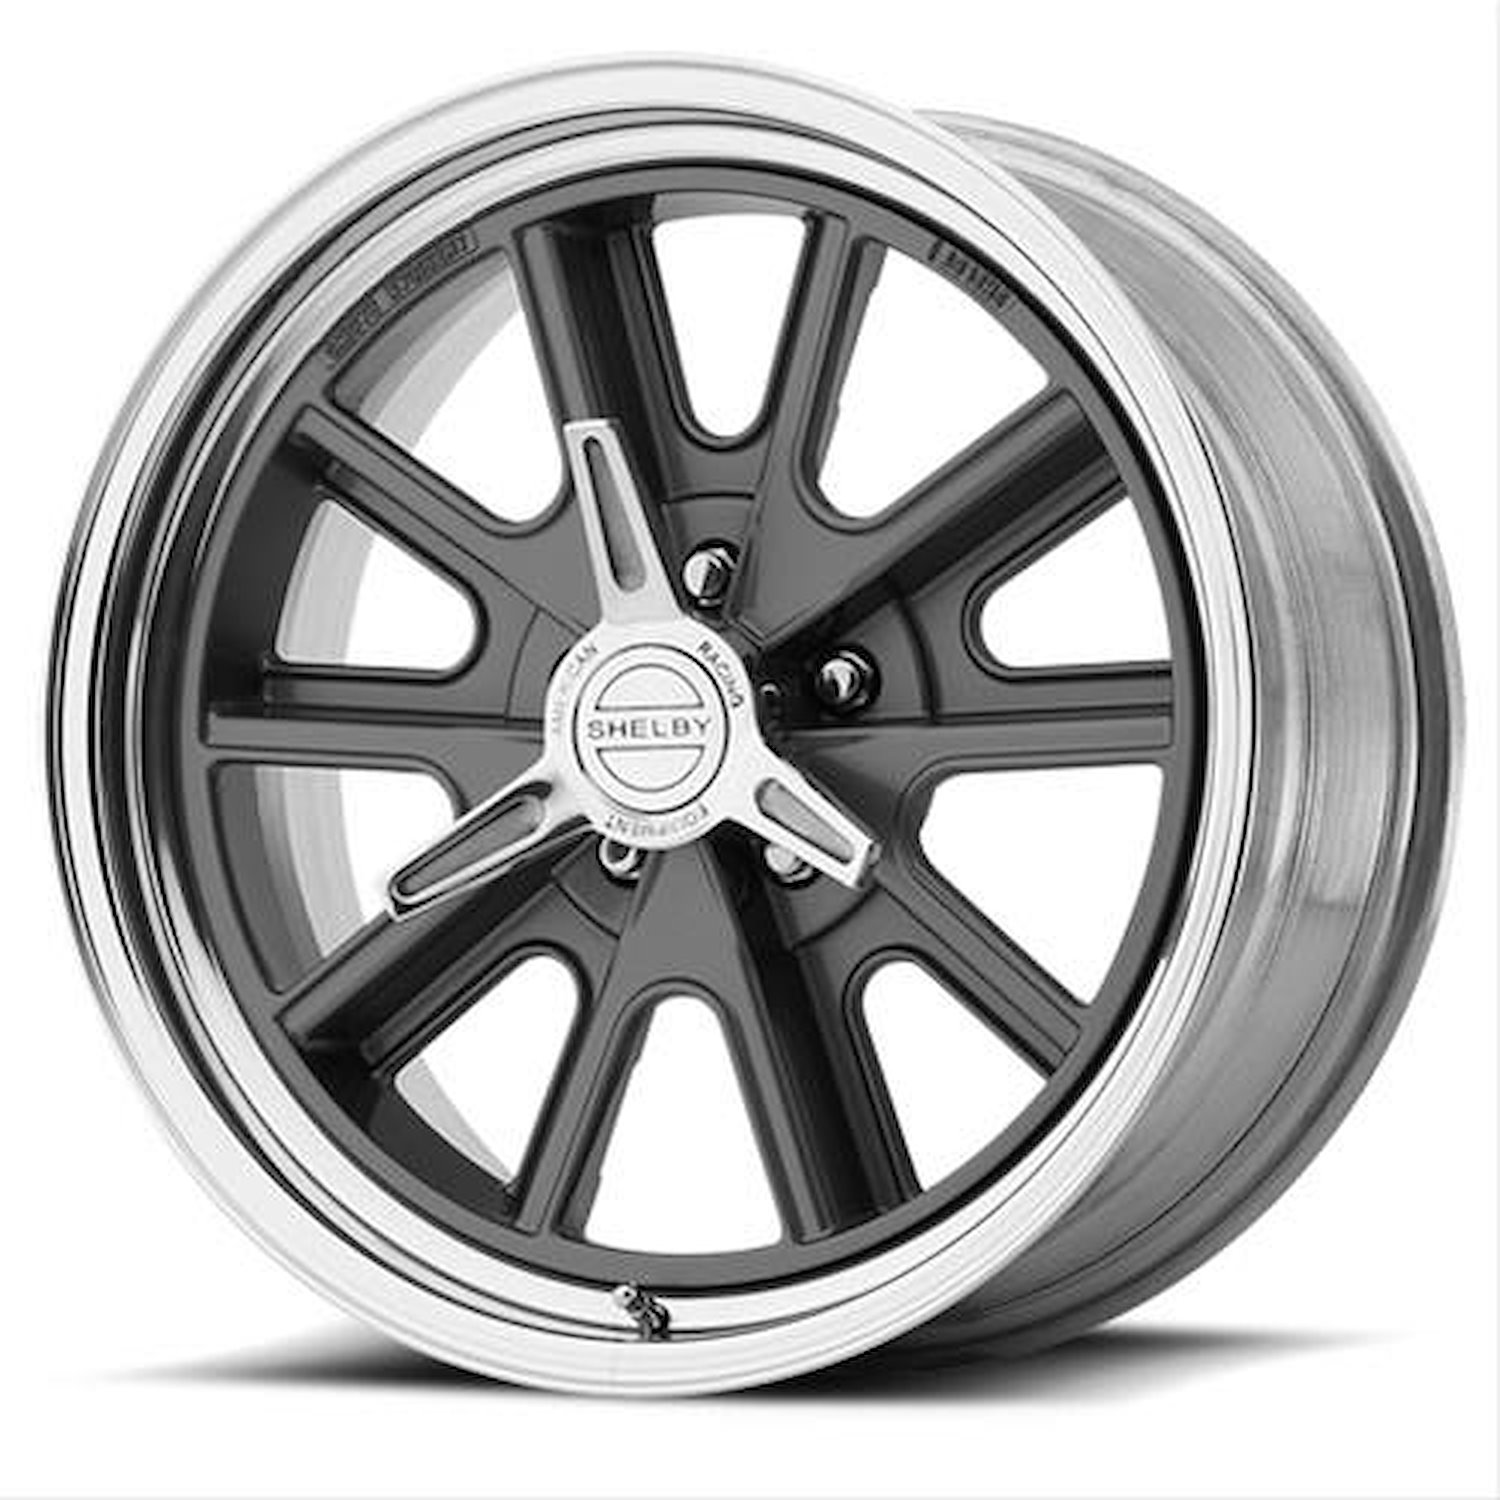 AMERICAN RACING 427 SHELBY COBRA TWO-PIECE MAG GRAY CENTER POLISHED BARREL 15 x 8 5X4.75 -12 4.03